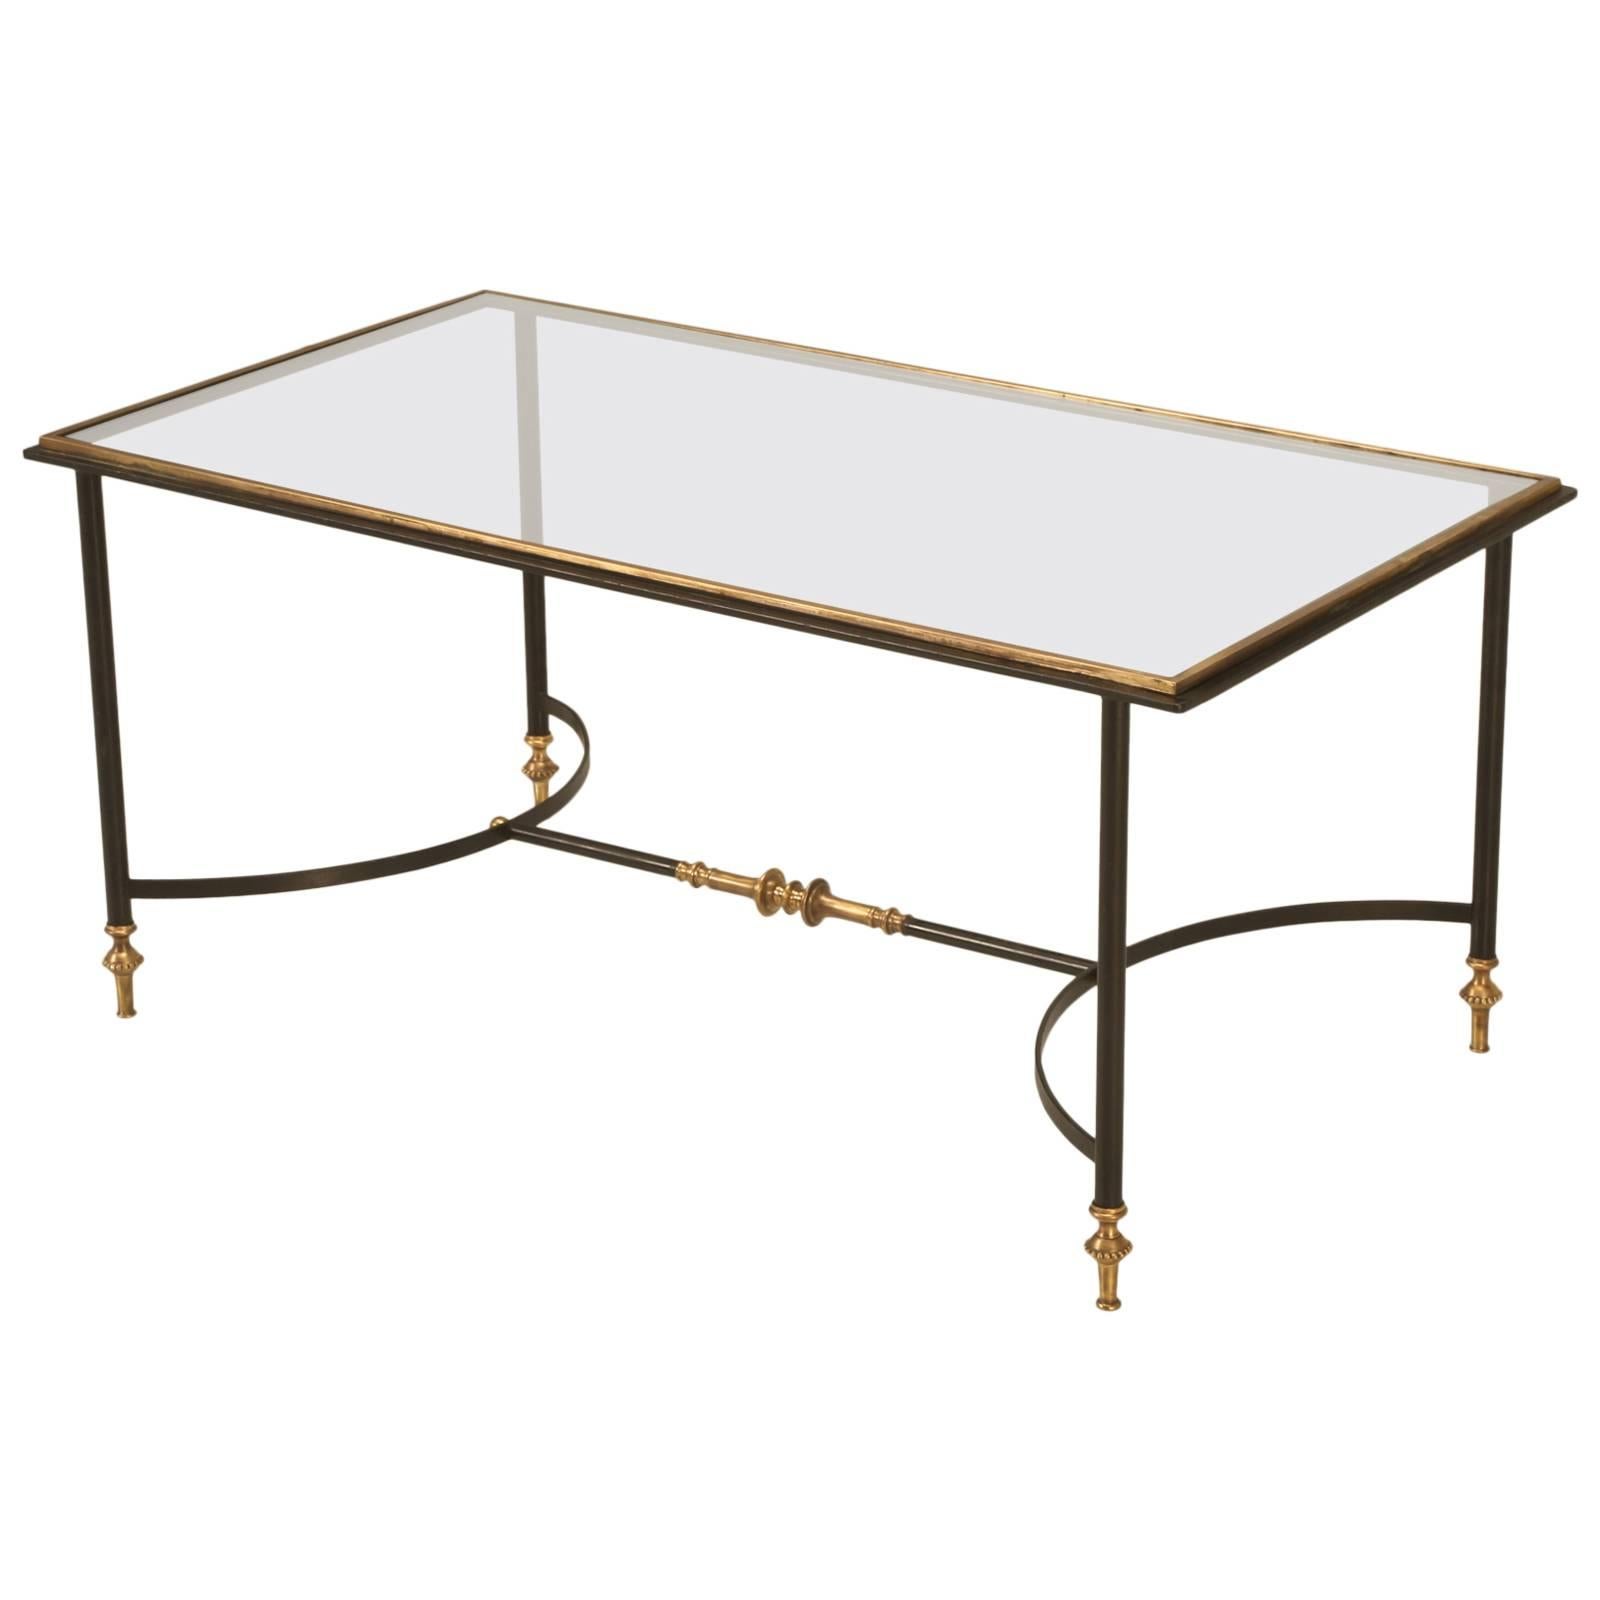 French Mid-Century Modern Coffee Table, circa 1960s